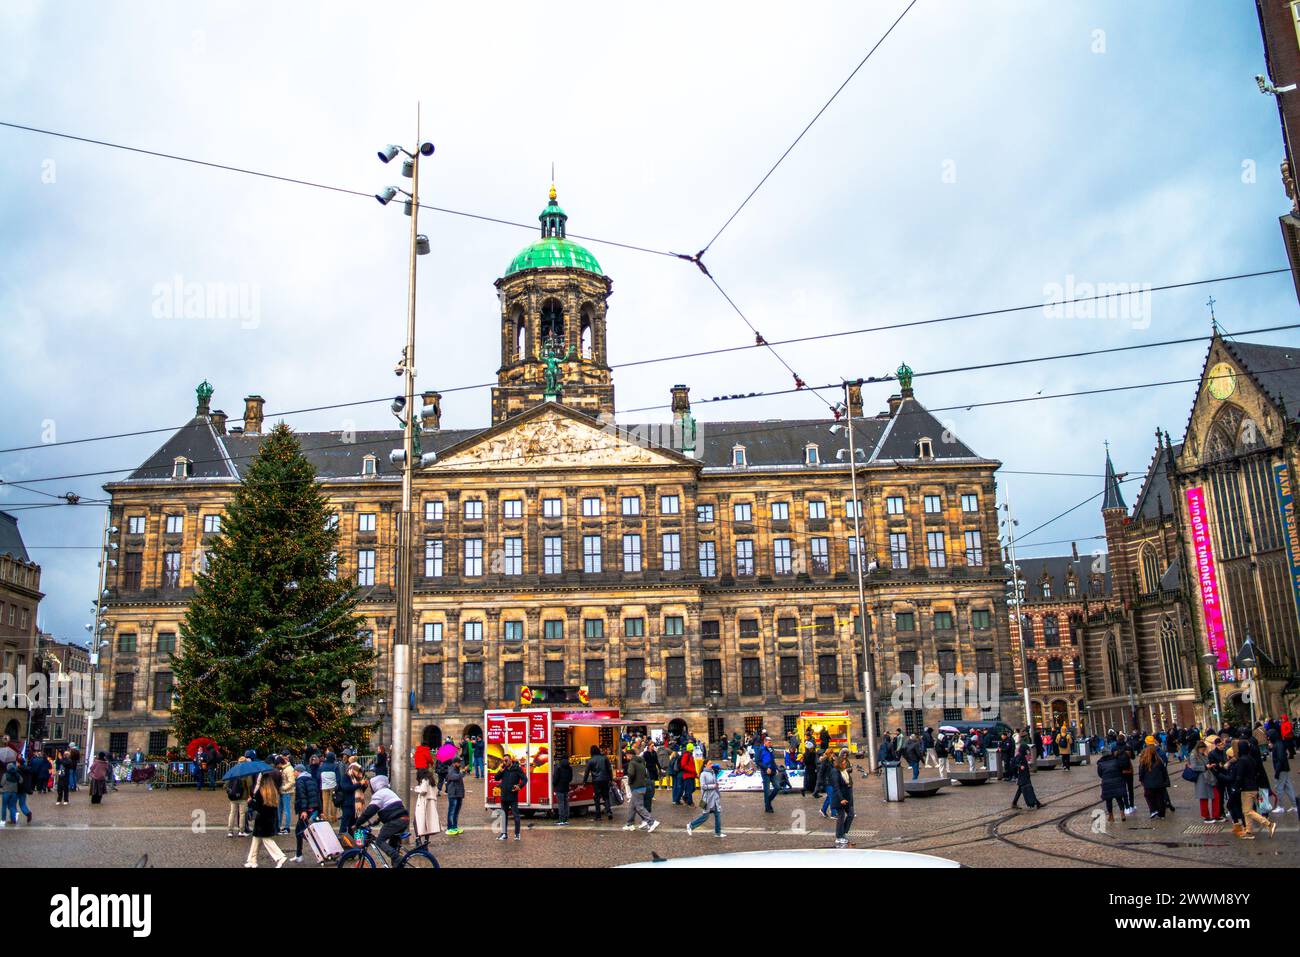 Dome Square in Amsterdam embodies historic charm and architectural beauty, with its iconic dome building and lively atmosphere. Stock Photo